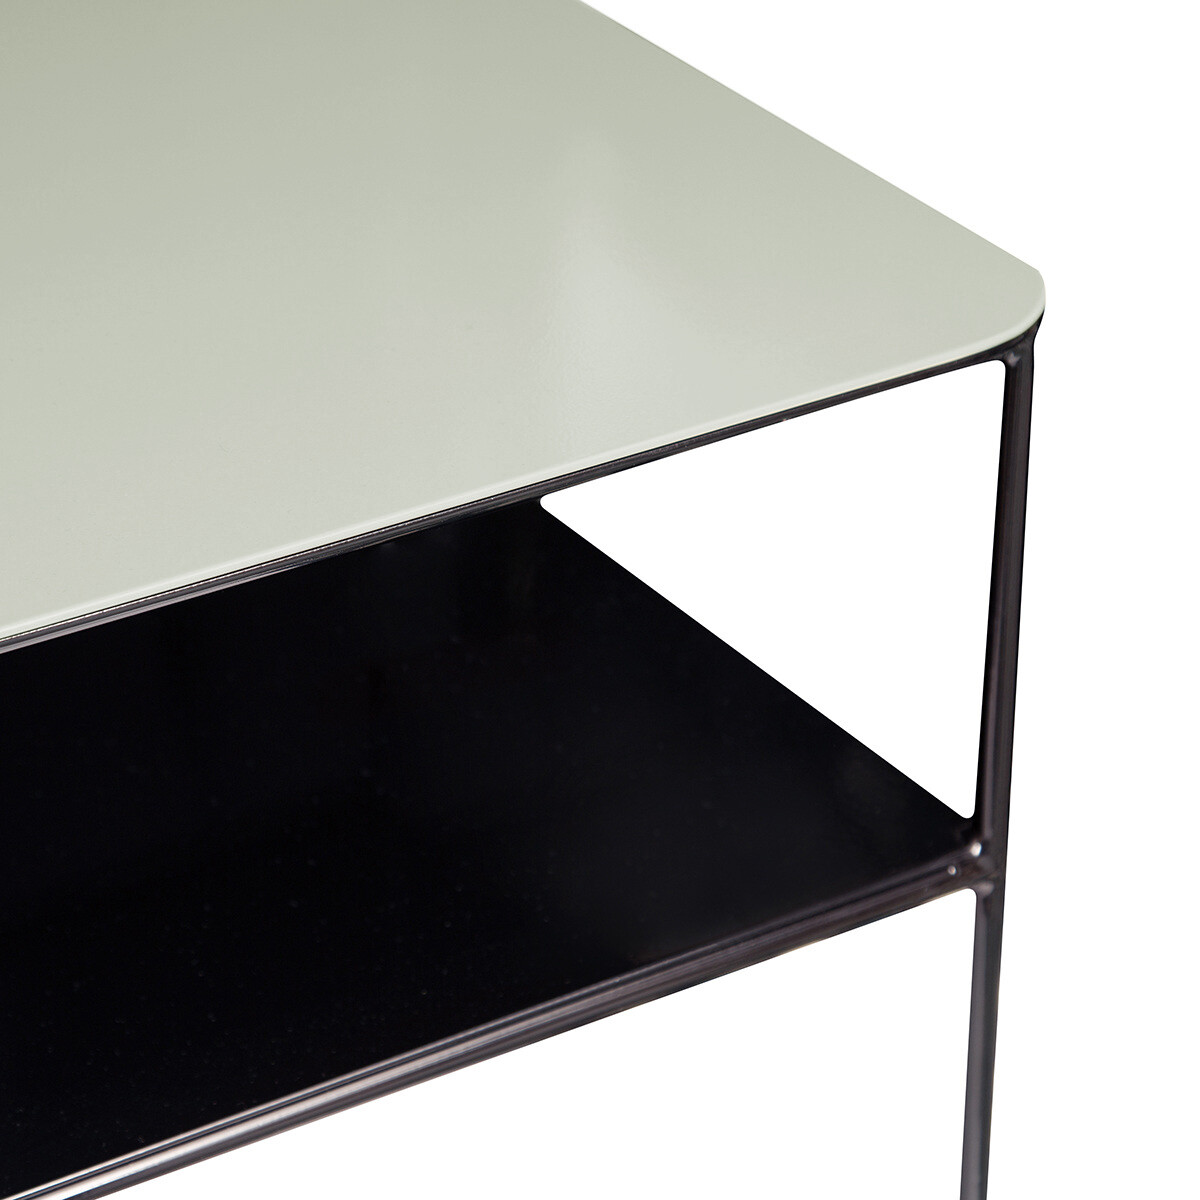 Console Table Double Jeu, Thyme / Black - W110 x D35 x H85 cm - Powder coated steel - image 2